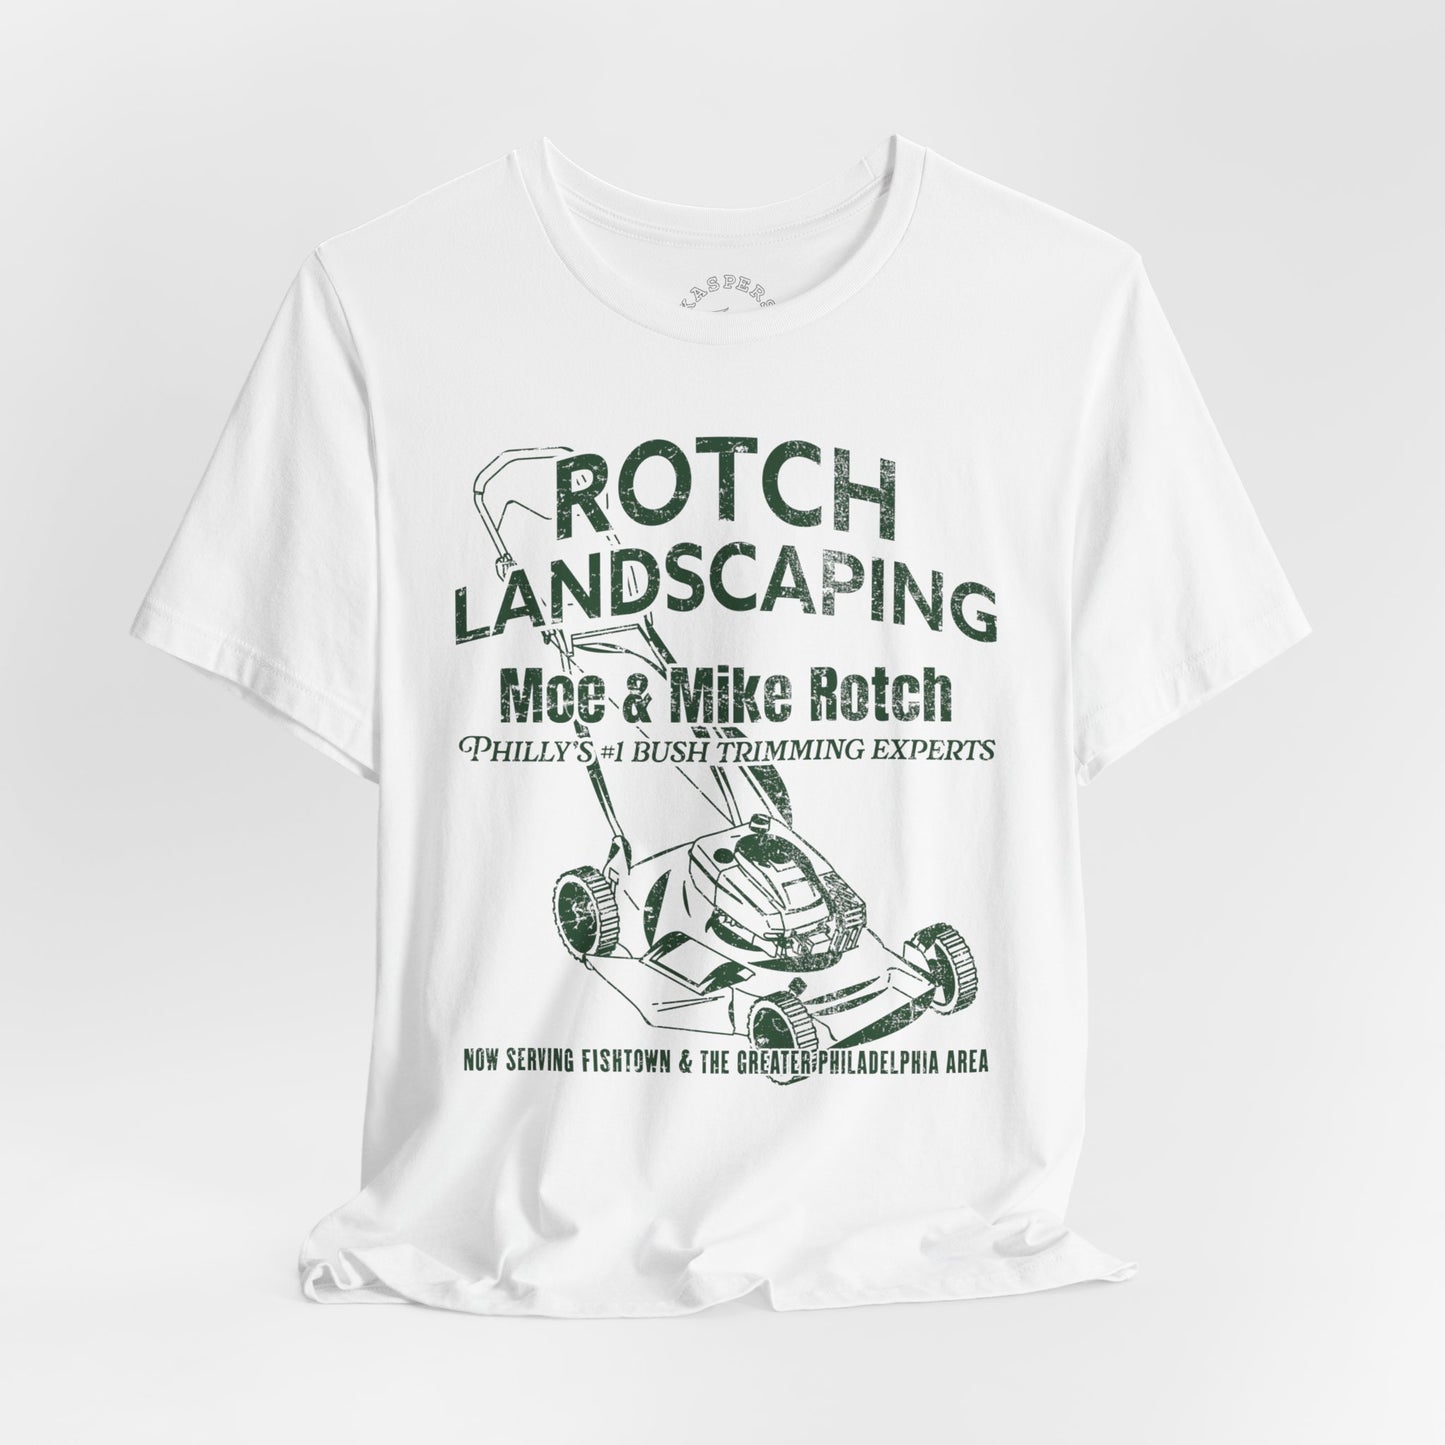 Moe & Mike Rotch Landscaping T-Shirt